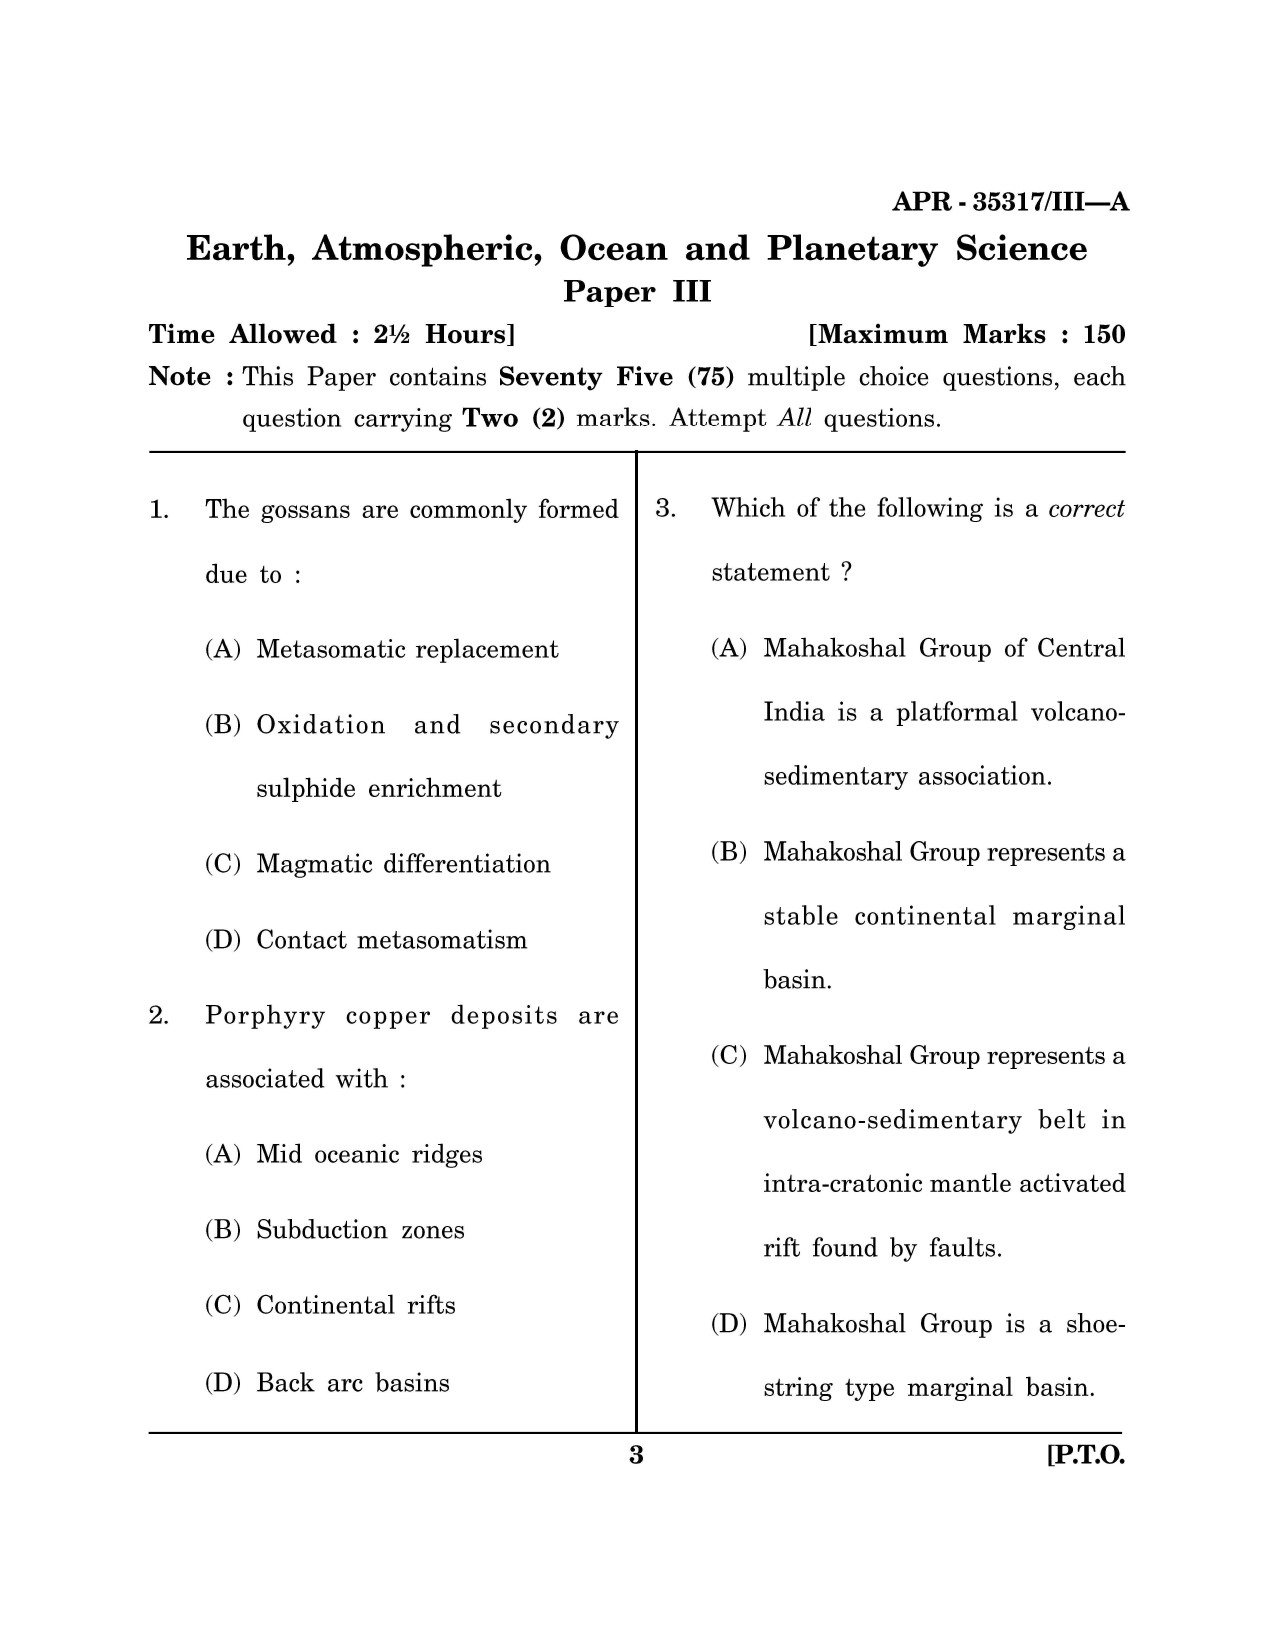 Maharashtra SET Earth Atmospheric Ocean Planetary Science Question Paper III April 2017 2